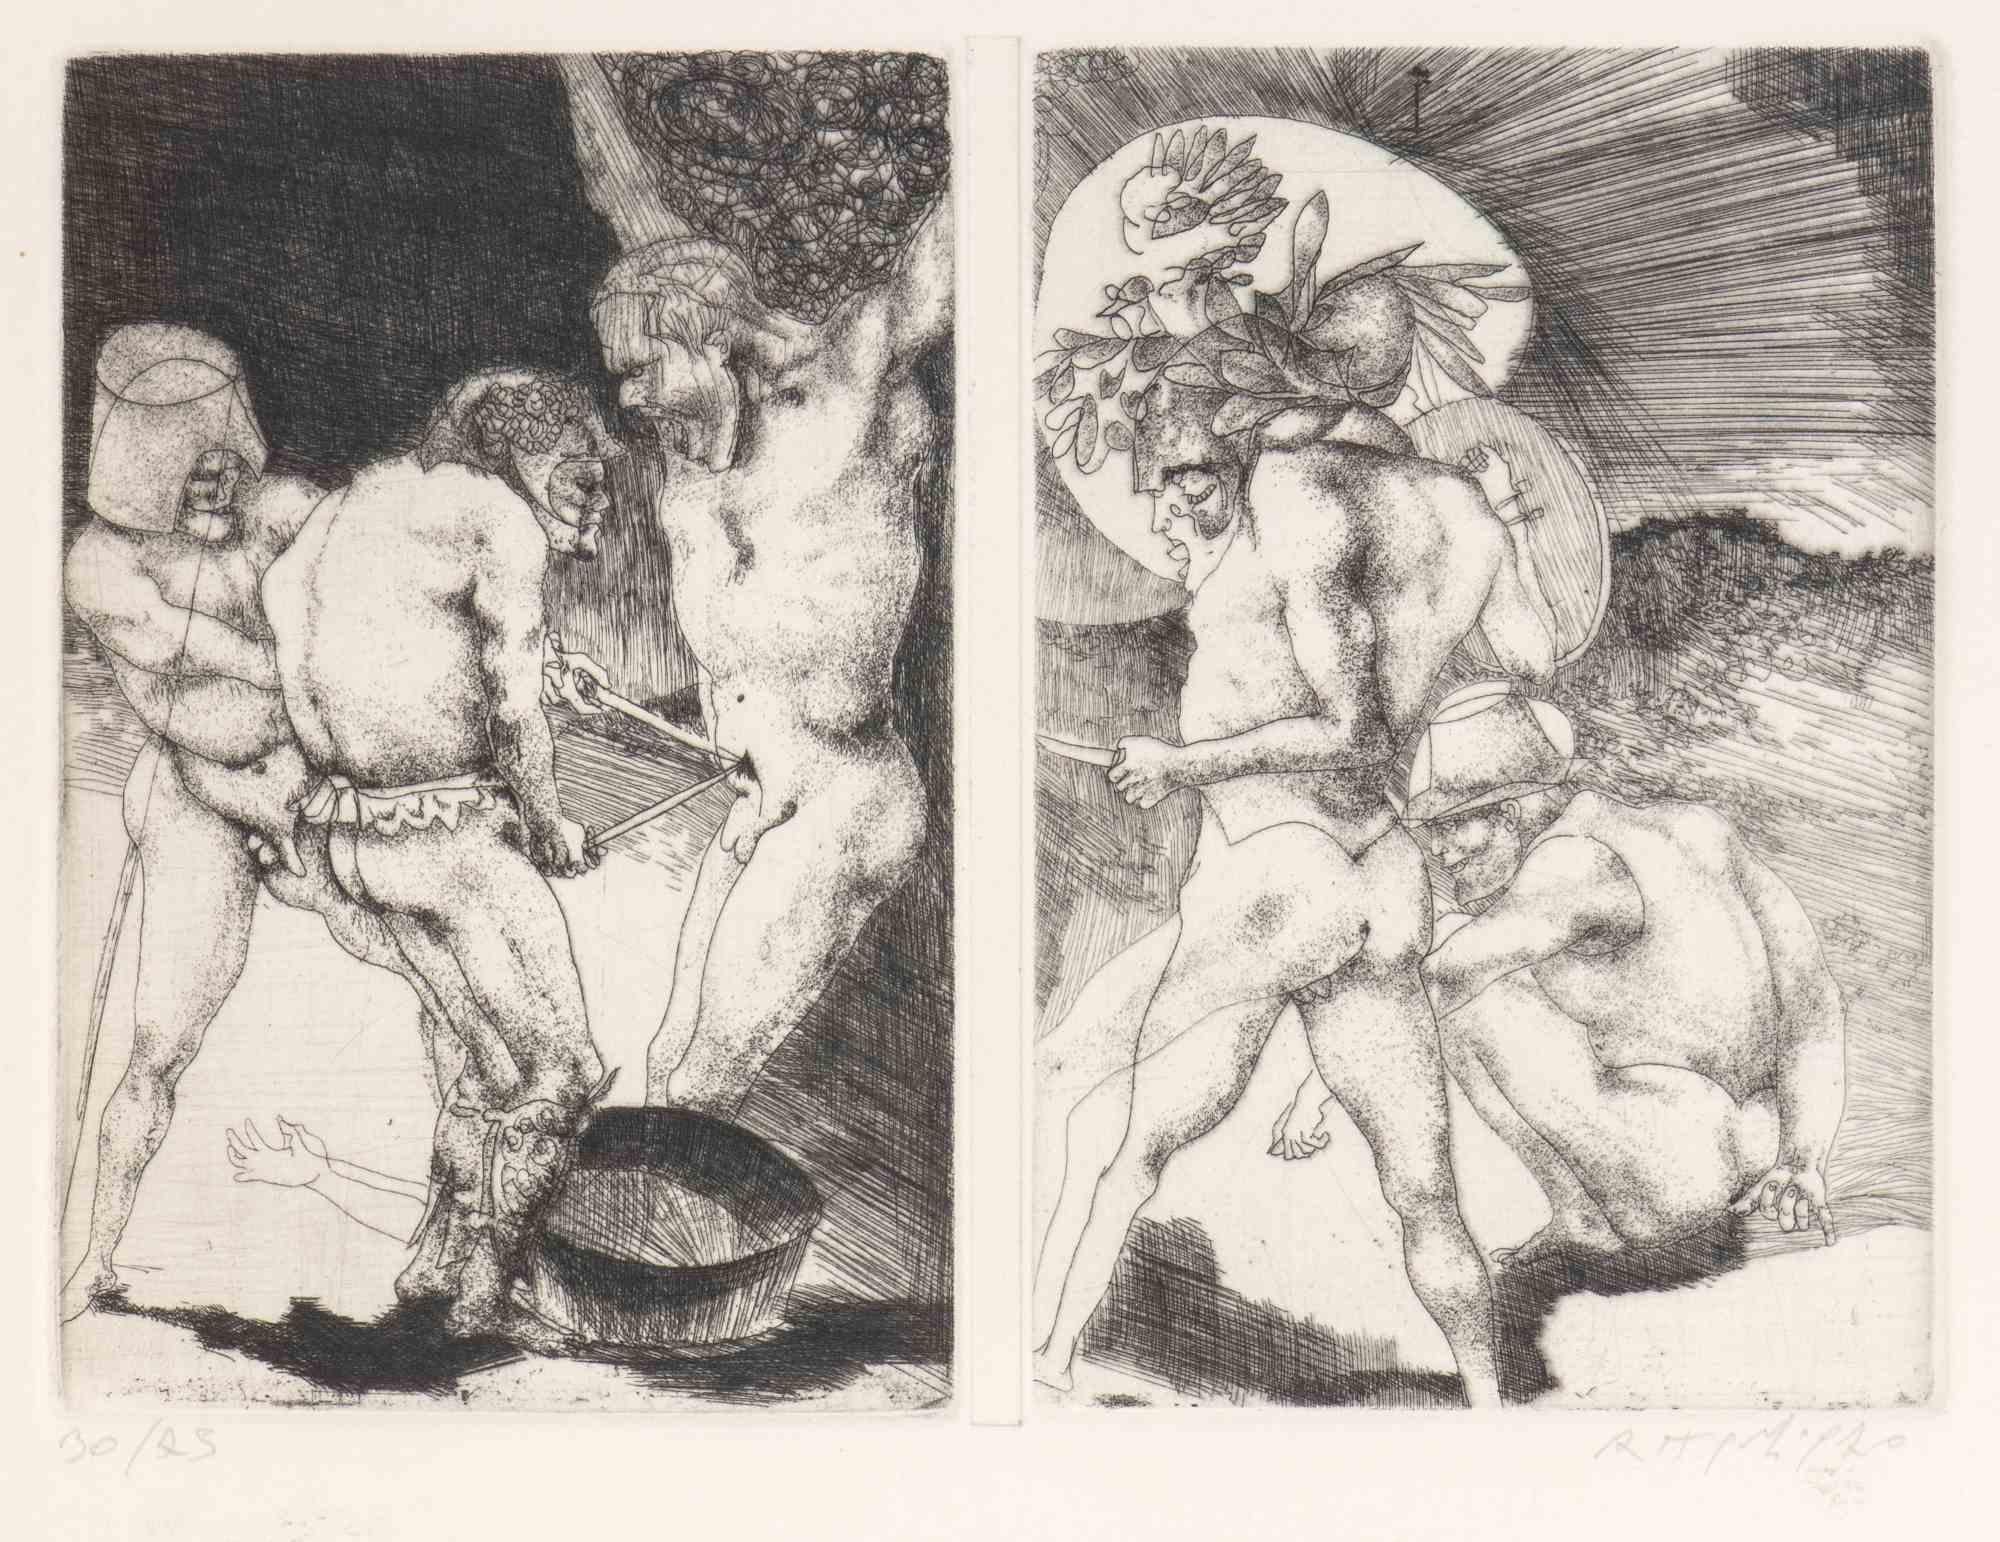 Complete Portfolio of 18 Etchings by Ugo Attardi - 1970s For Sale 1